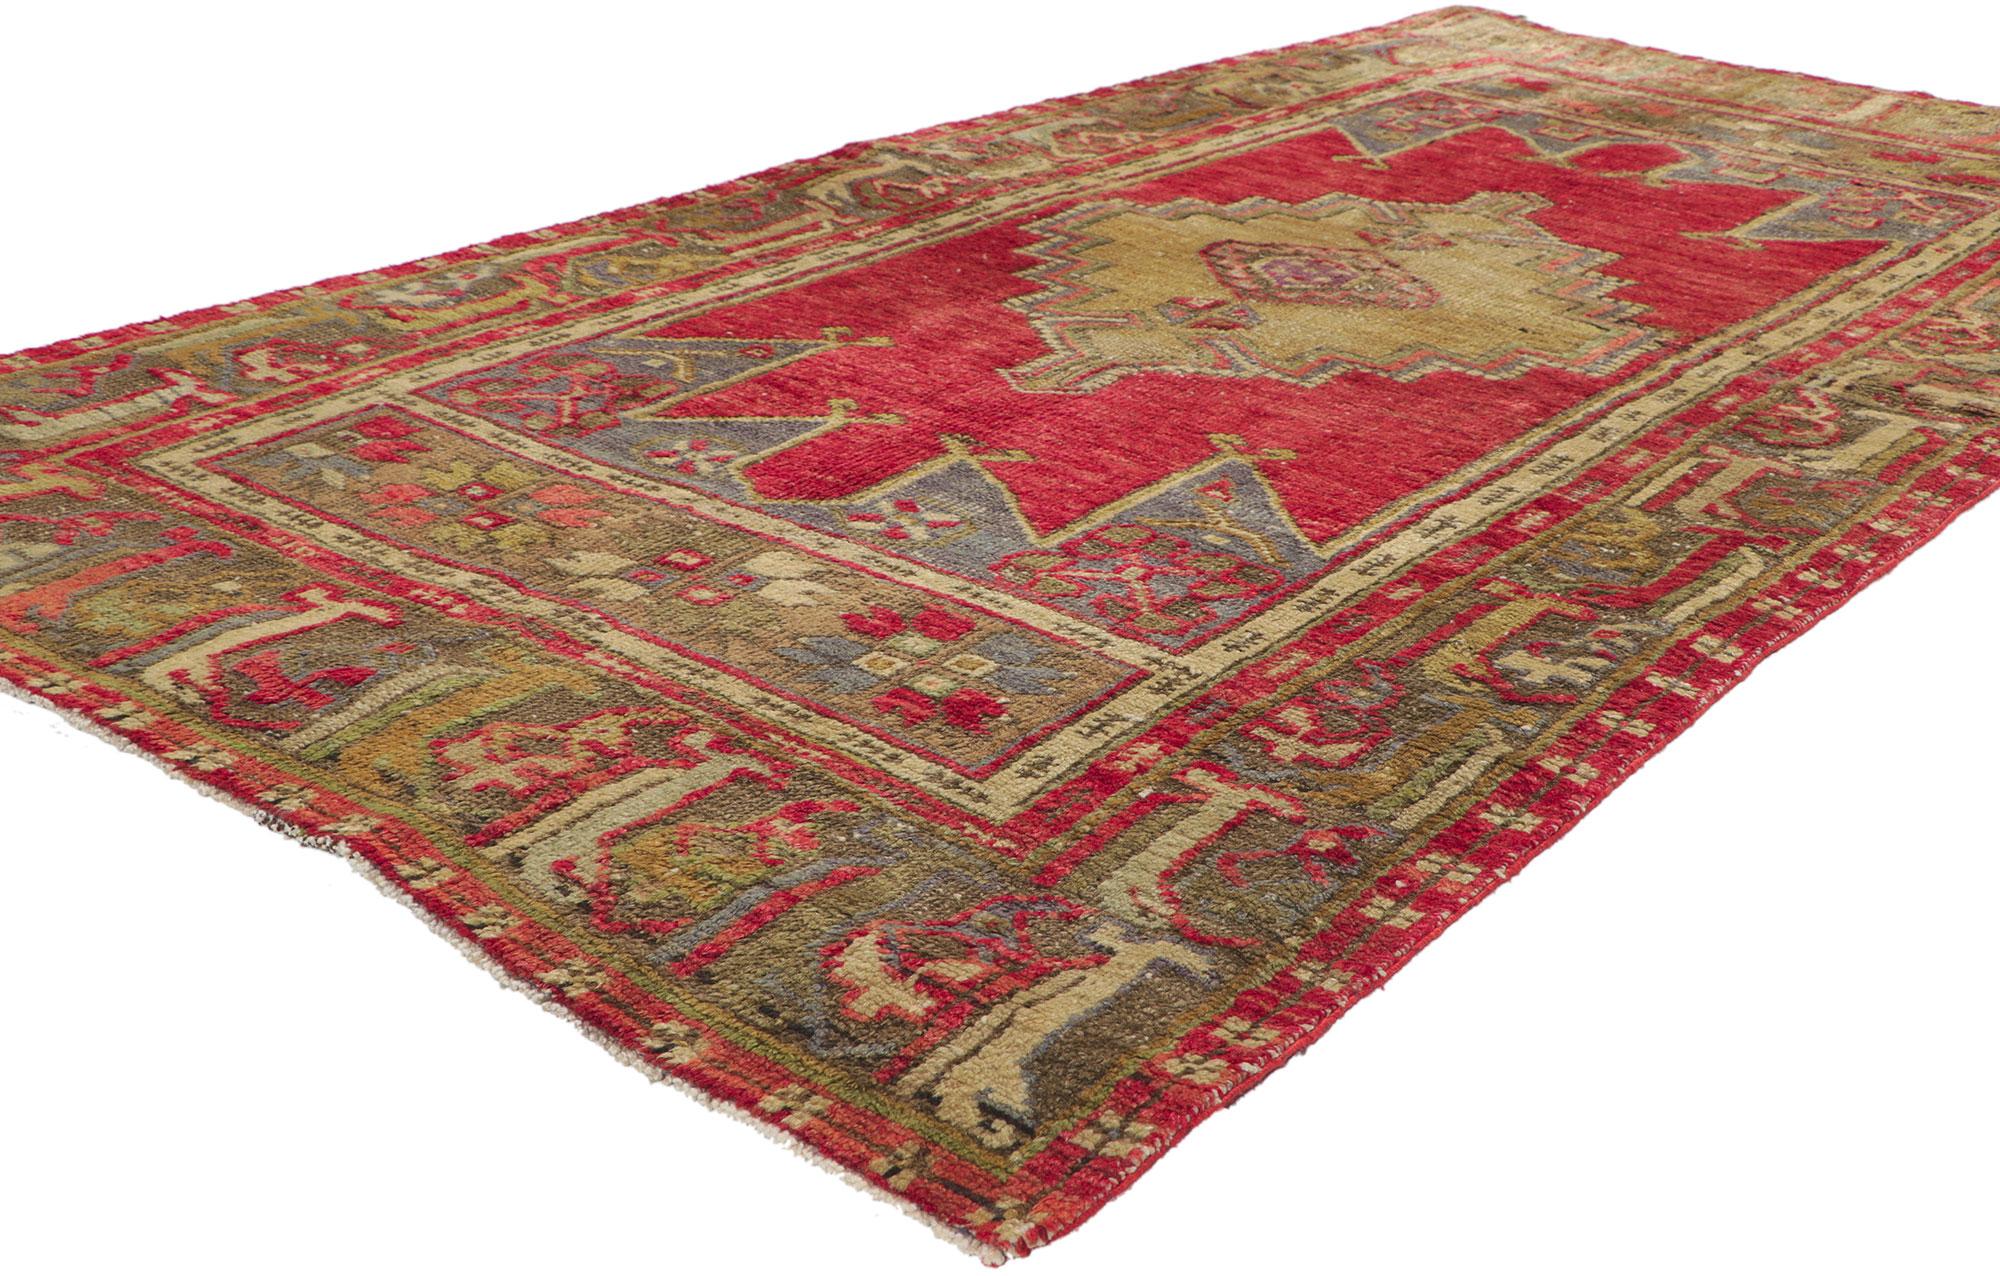 51165 Vintage Turkish Oushak Rug, 03'11 X 07'07. This hand knotted wool vintage Turkish Oushak rug features a modern traditional style. Immersed in Anatolian history and refined colors, this vintage Oushak rug combines simplicity with